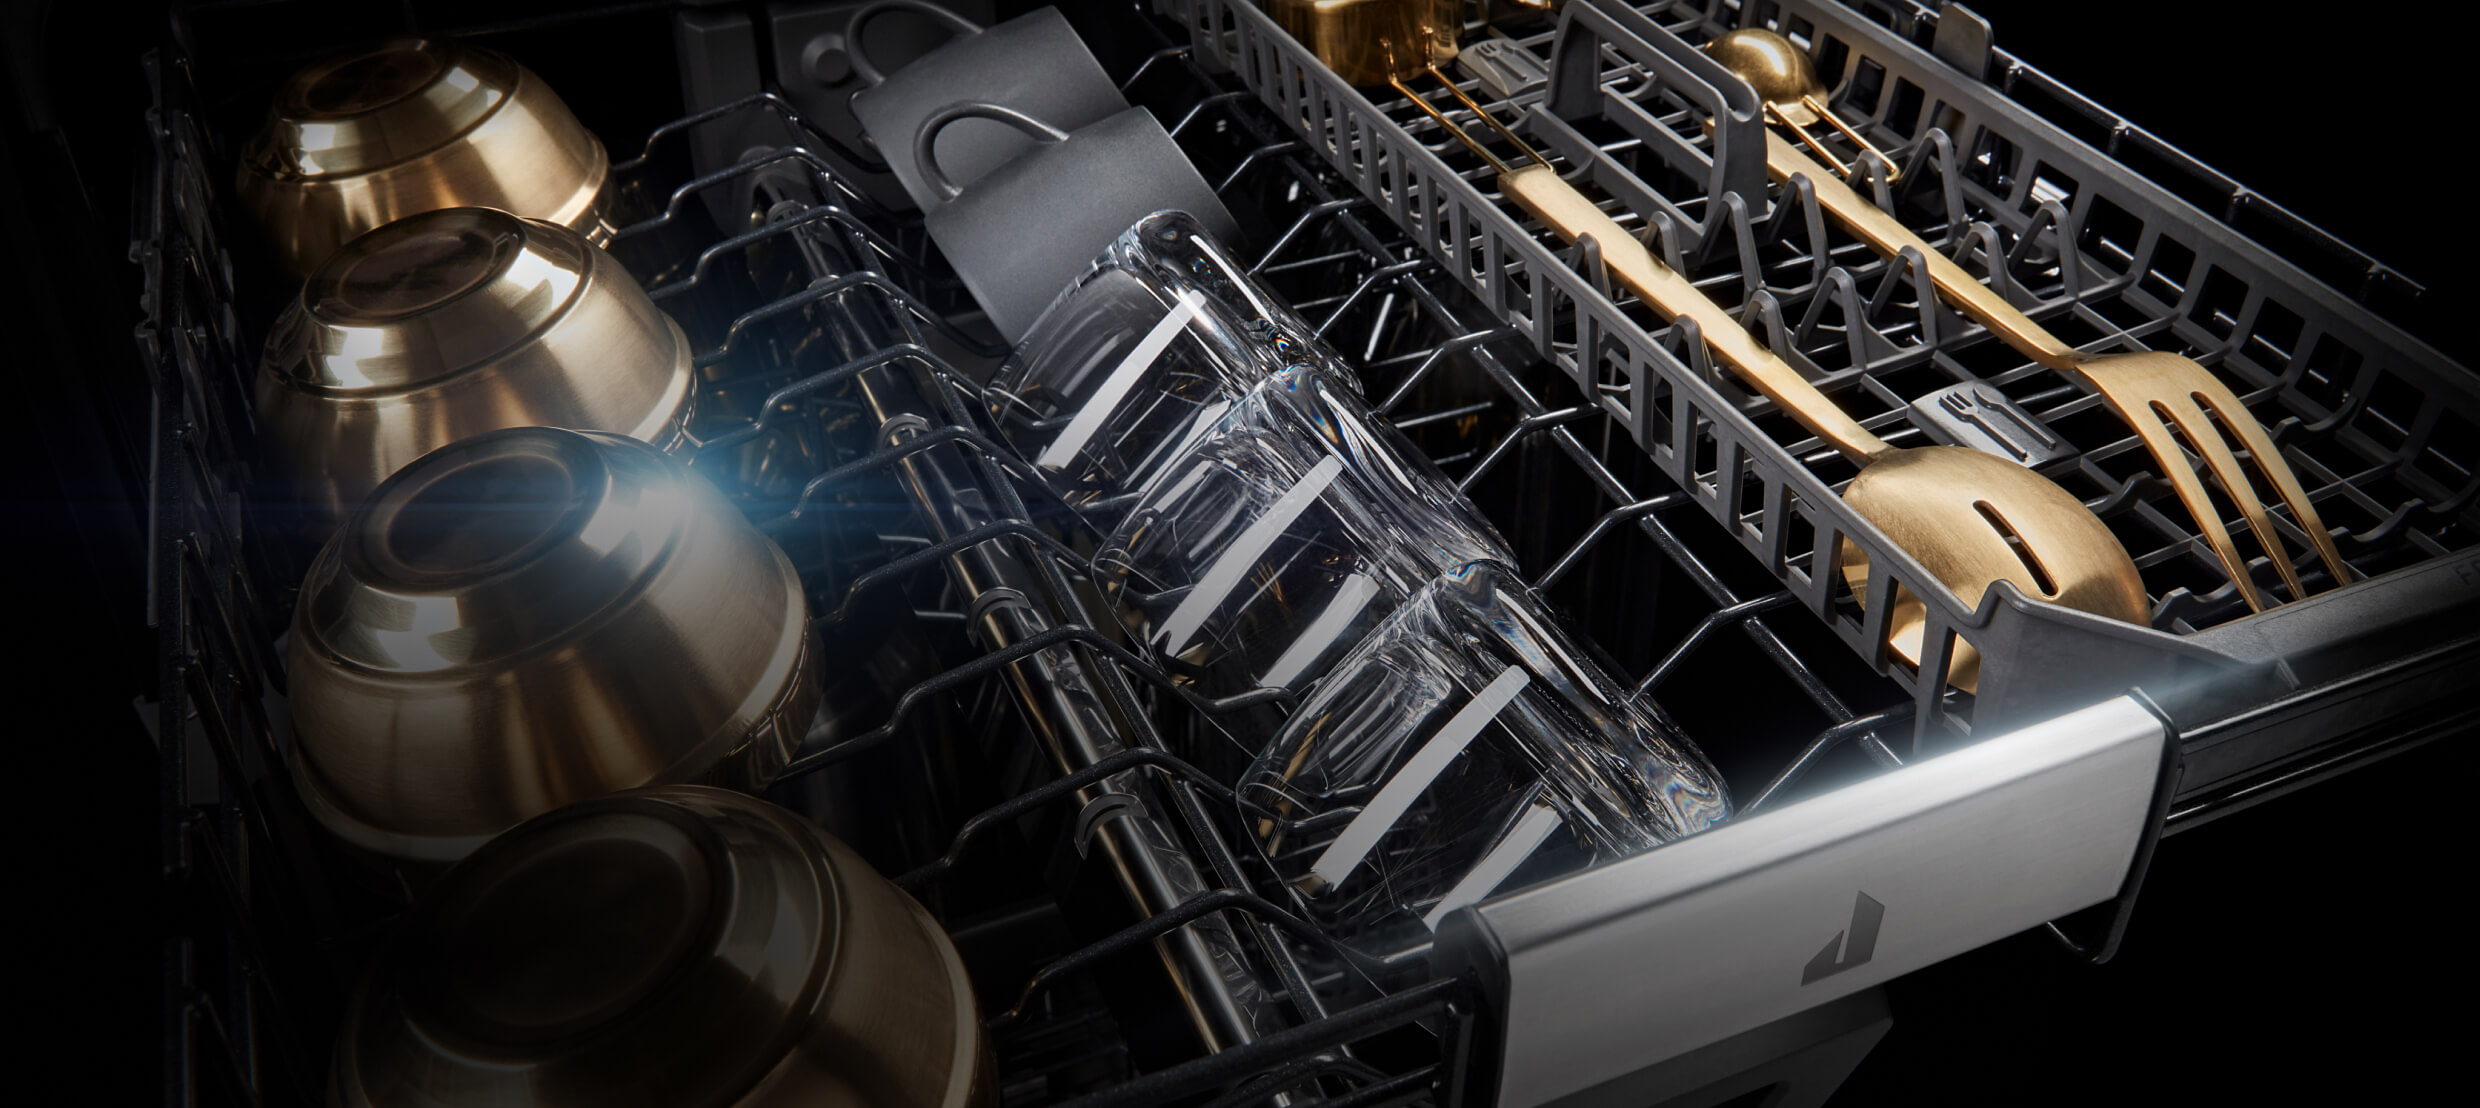 Dry, gleaming dishes in the 3rd rack of a dishwasher.